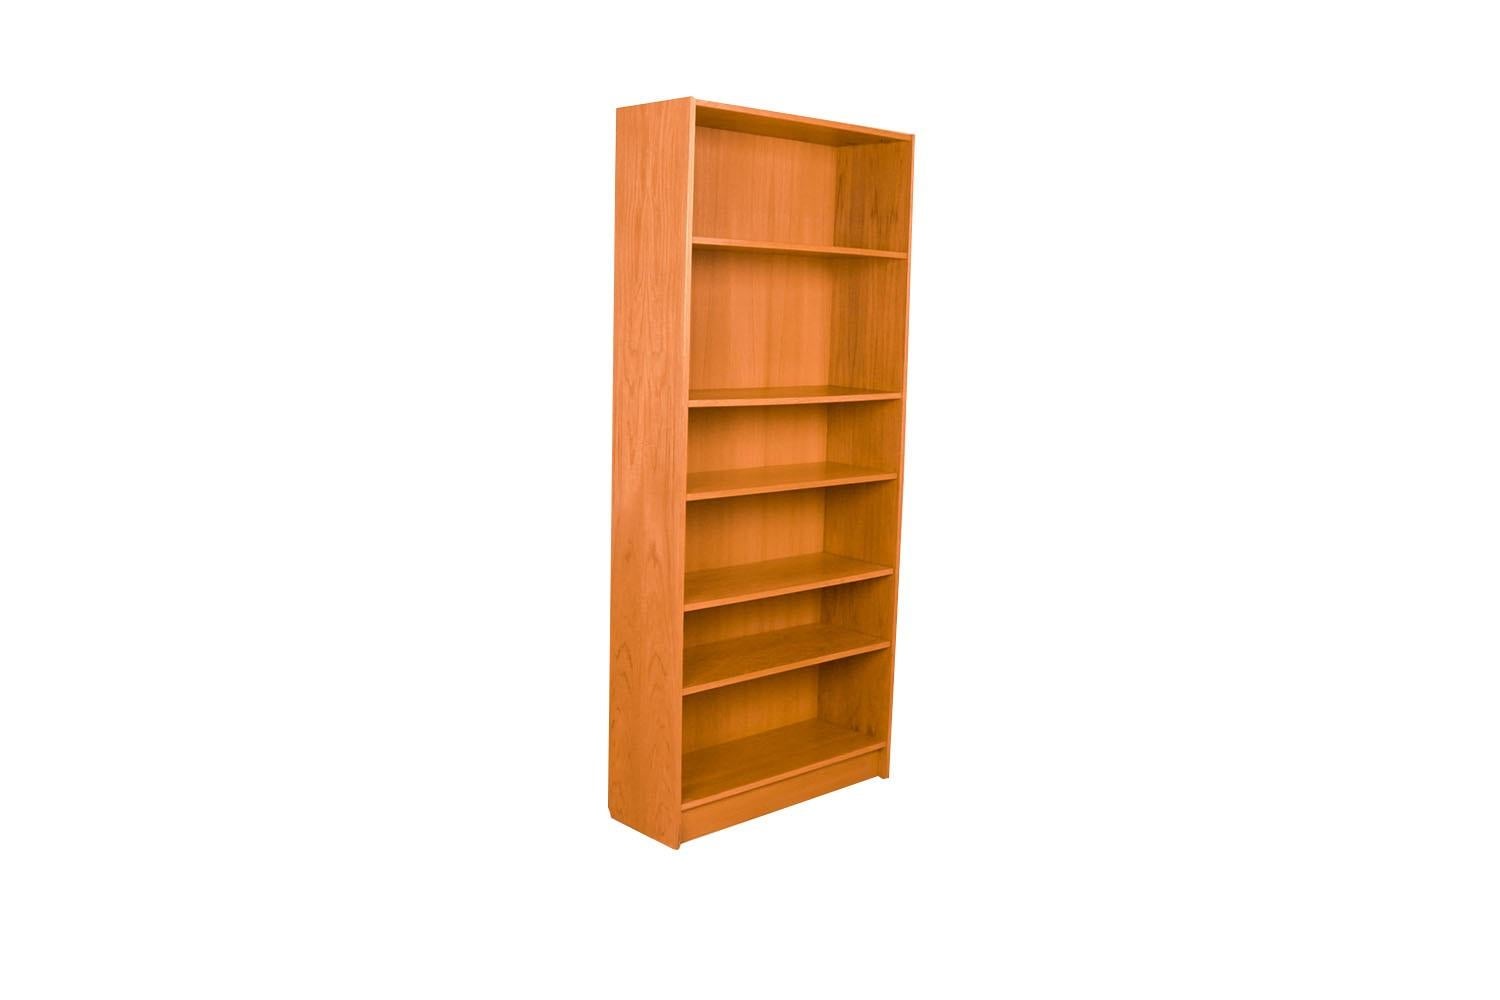 An exceptional teak tall bookcase from Denmark. Gorgeous Mid-Century Modern Teak bookcase / tall bookshelf unit. Beautiful, minimalist, clean, straight lines, features 4 adjustable shelves and one fixed for various display configurations. Tall and